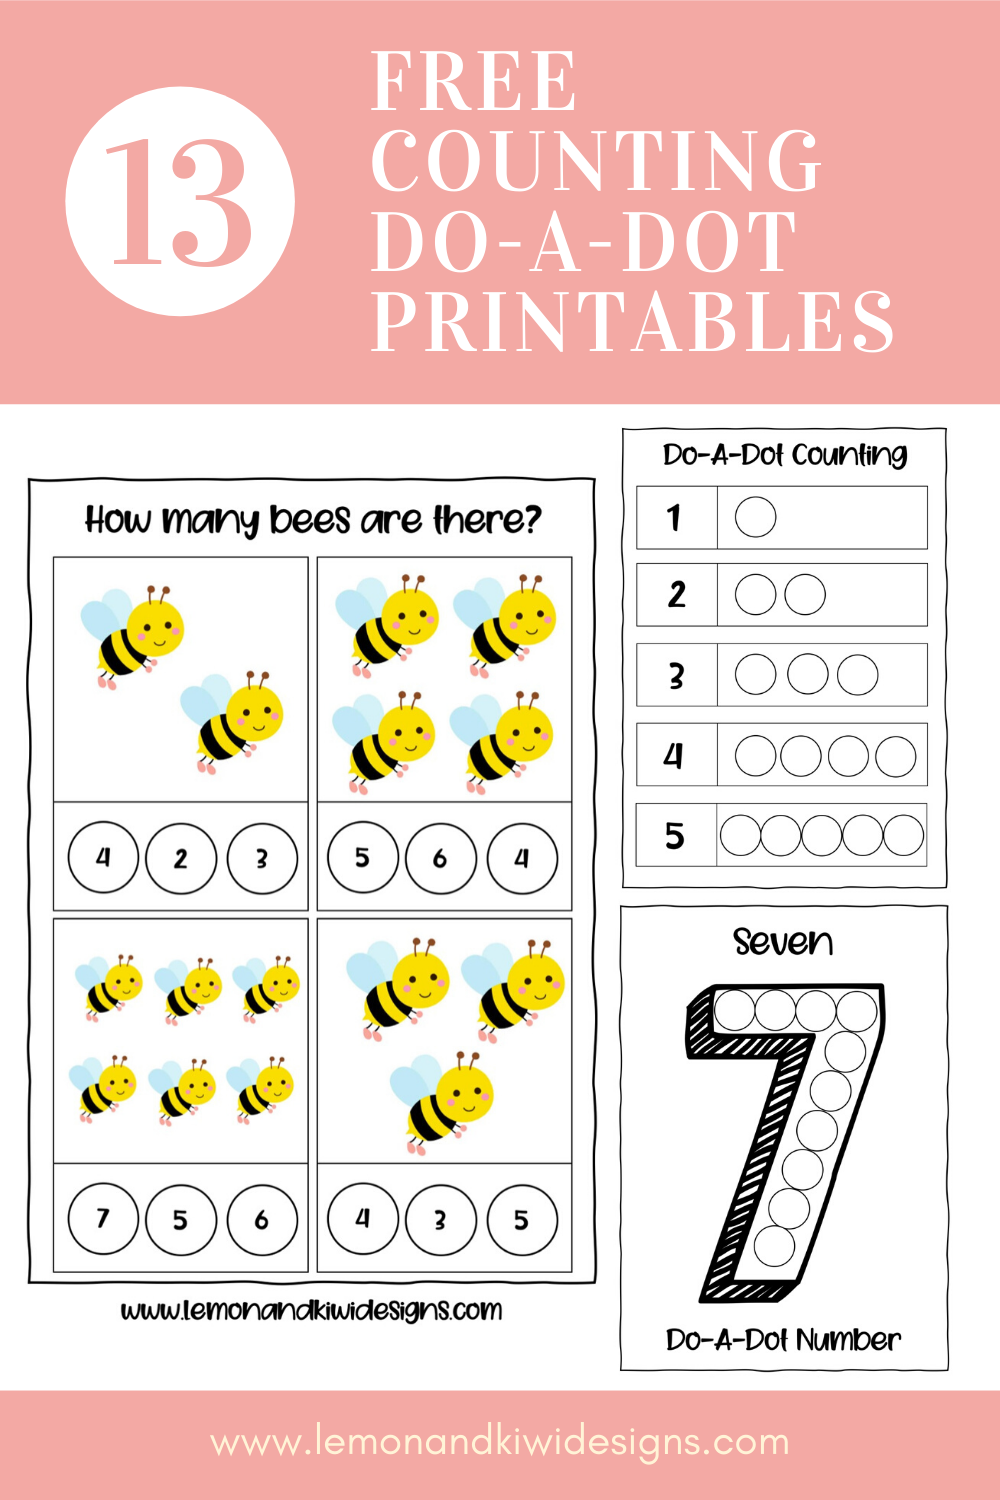 Free Counting Do-A-Dot Printables